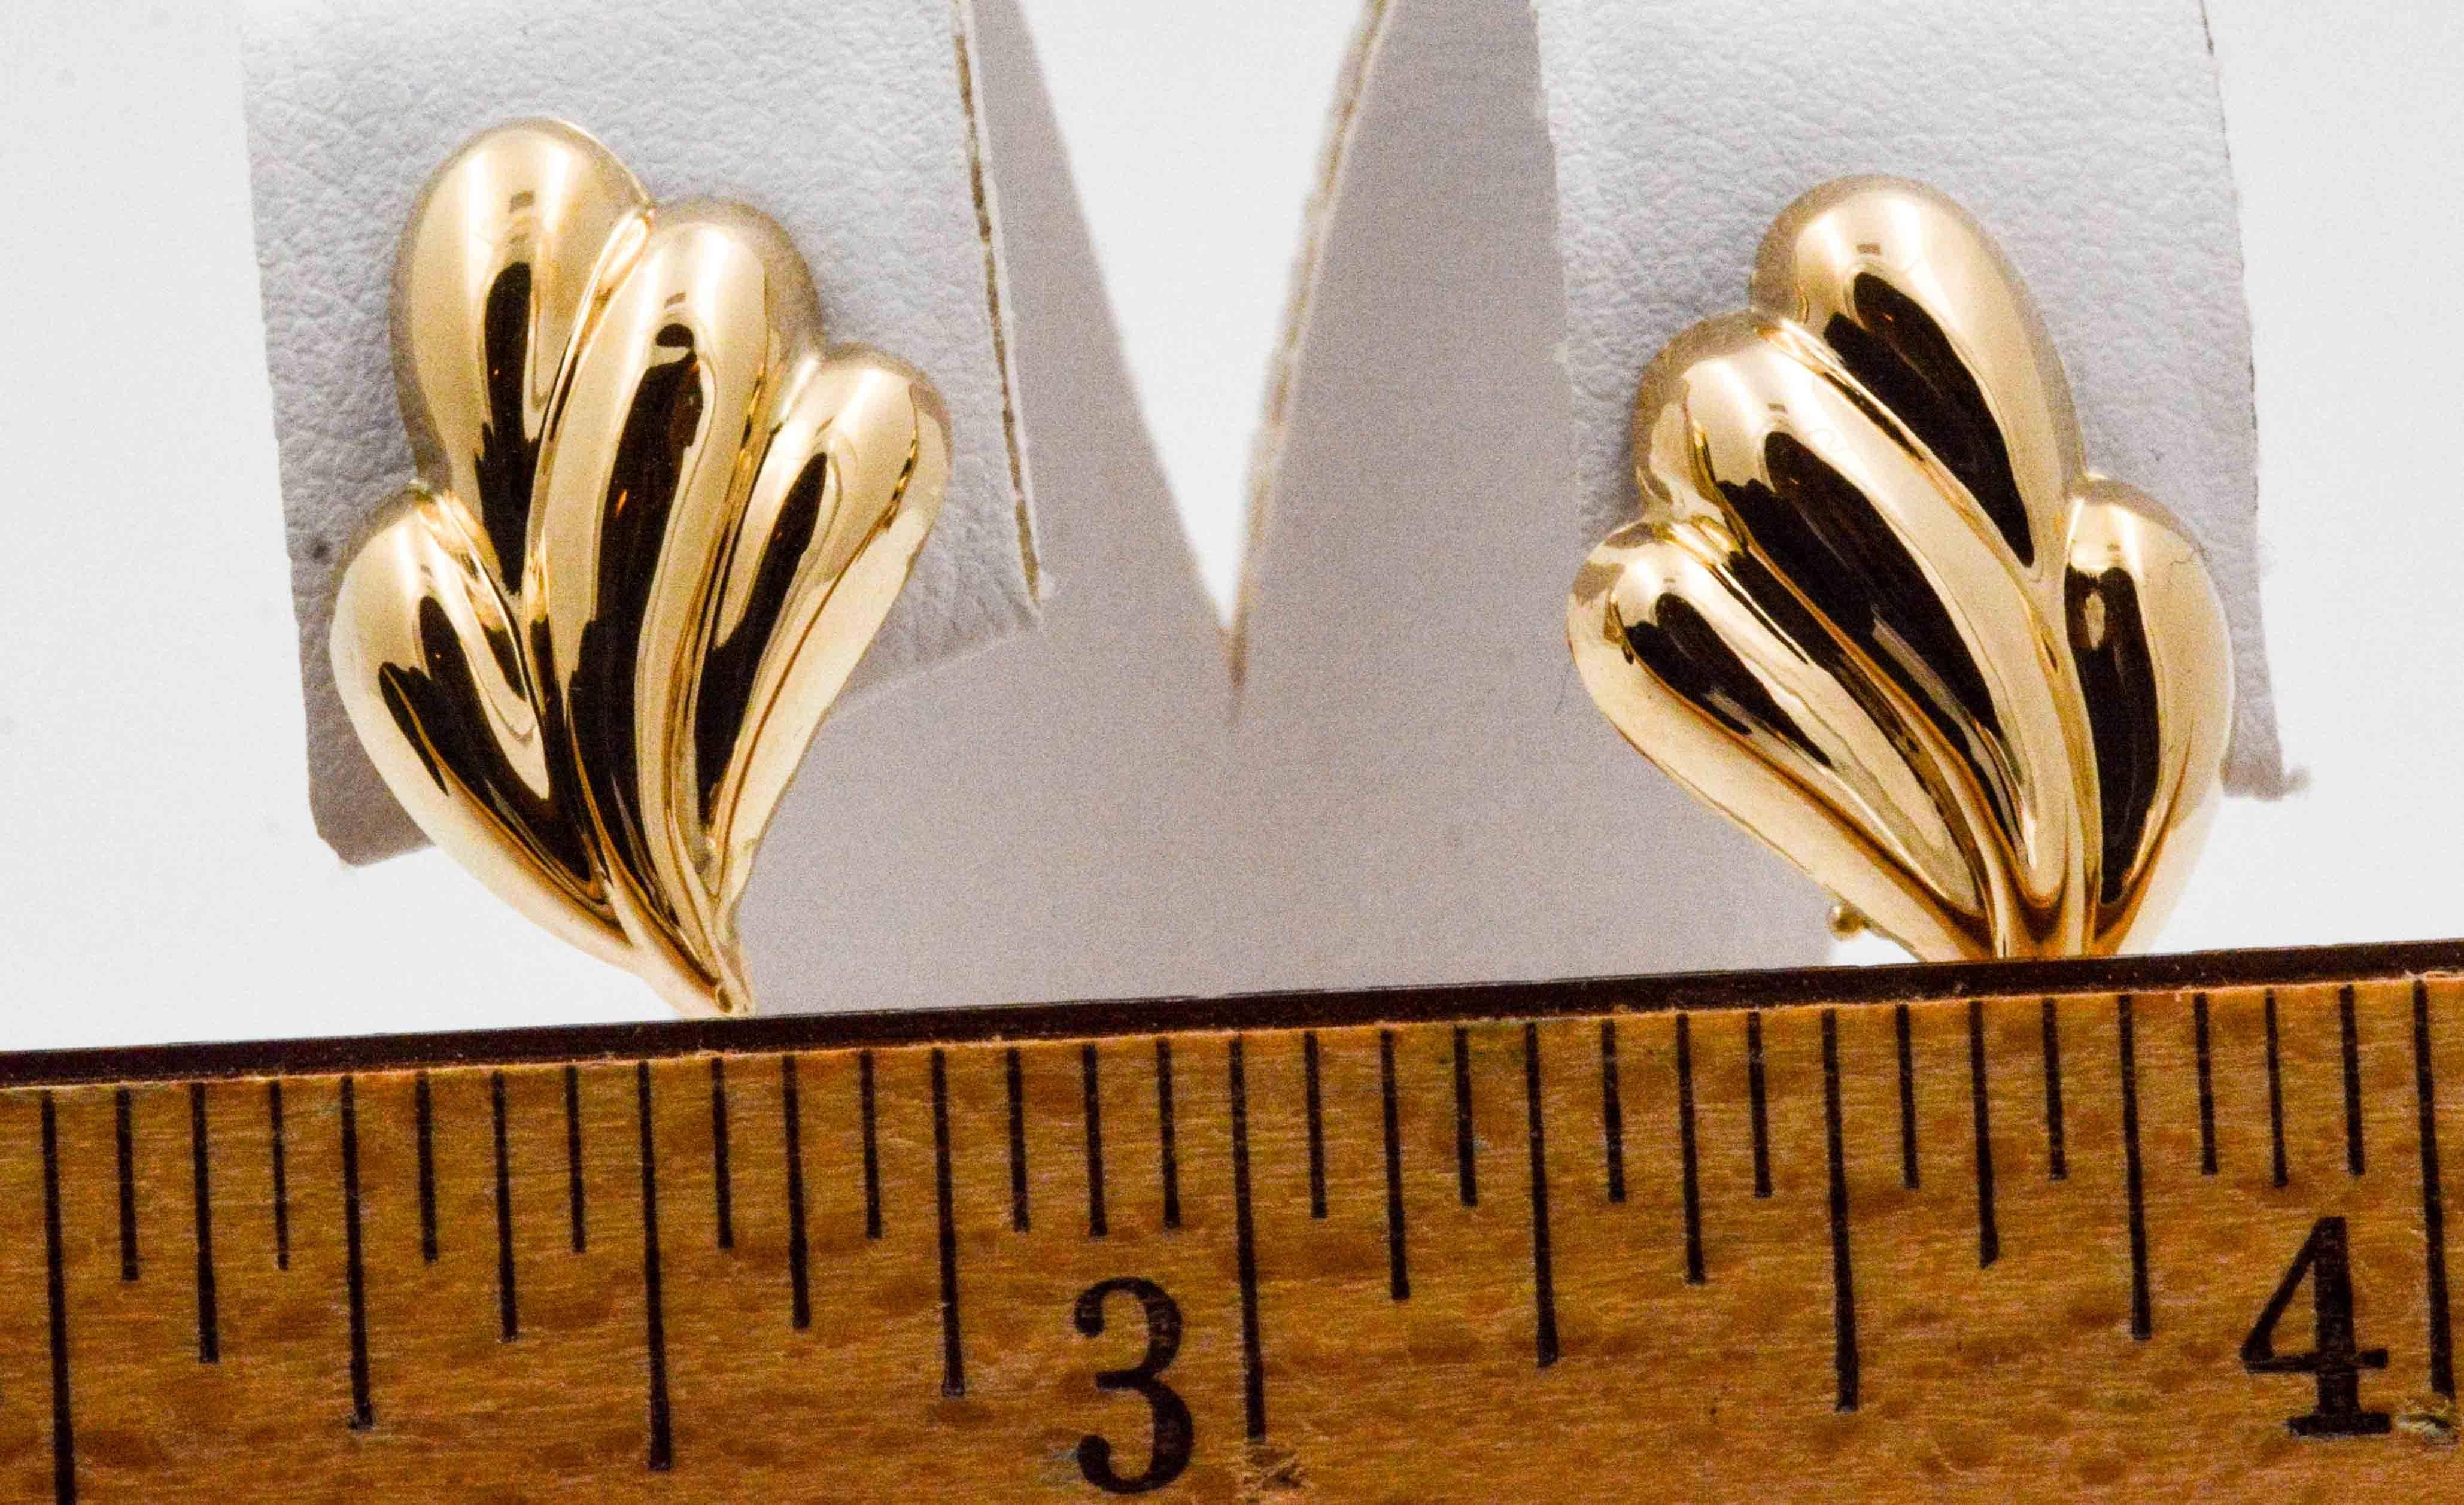 Stylish and tailored 14 karat yellow gold clip back earrings lend a sophisticated flair to your ensemble. These earrings are light as a feather and secure on the ears with a clip back, and have passed the our standard of quality.